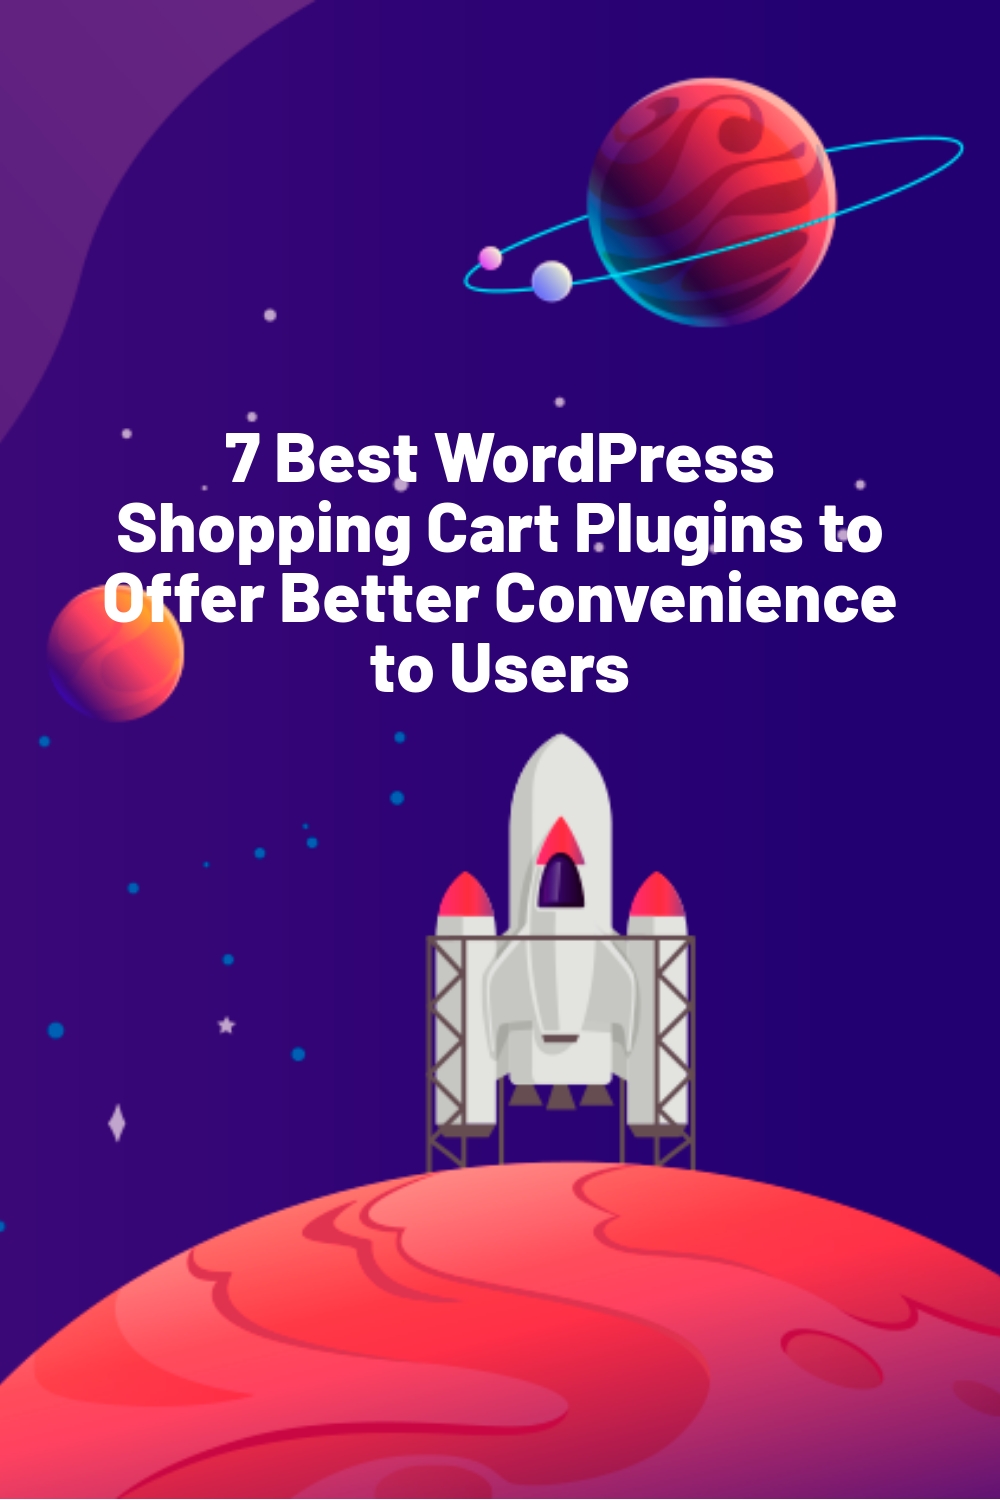 7 Best WordPress Shopping Cart Plugins to Offer Better Convenience to Users